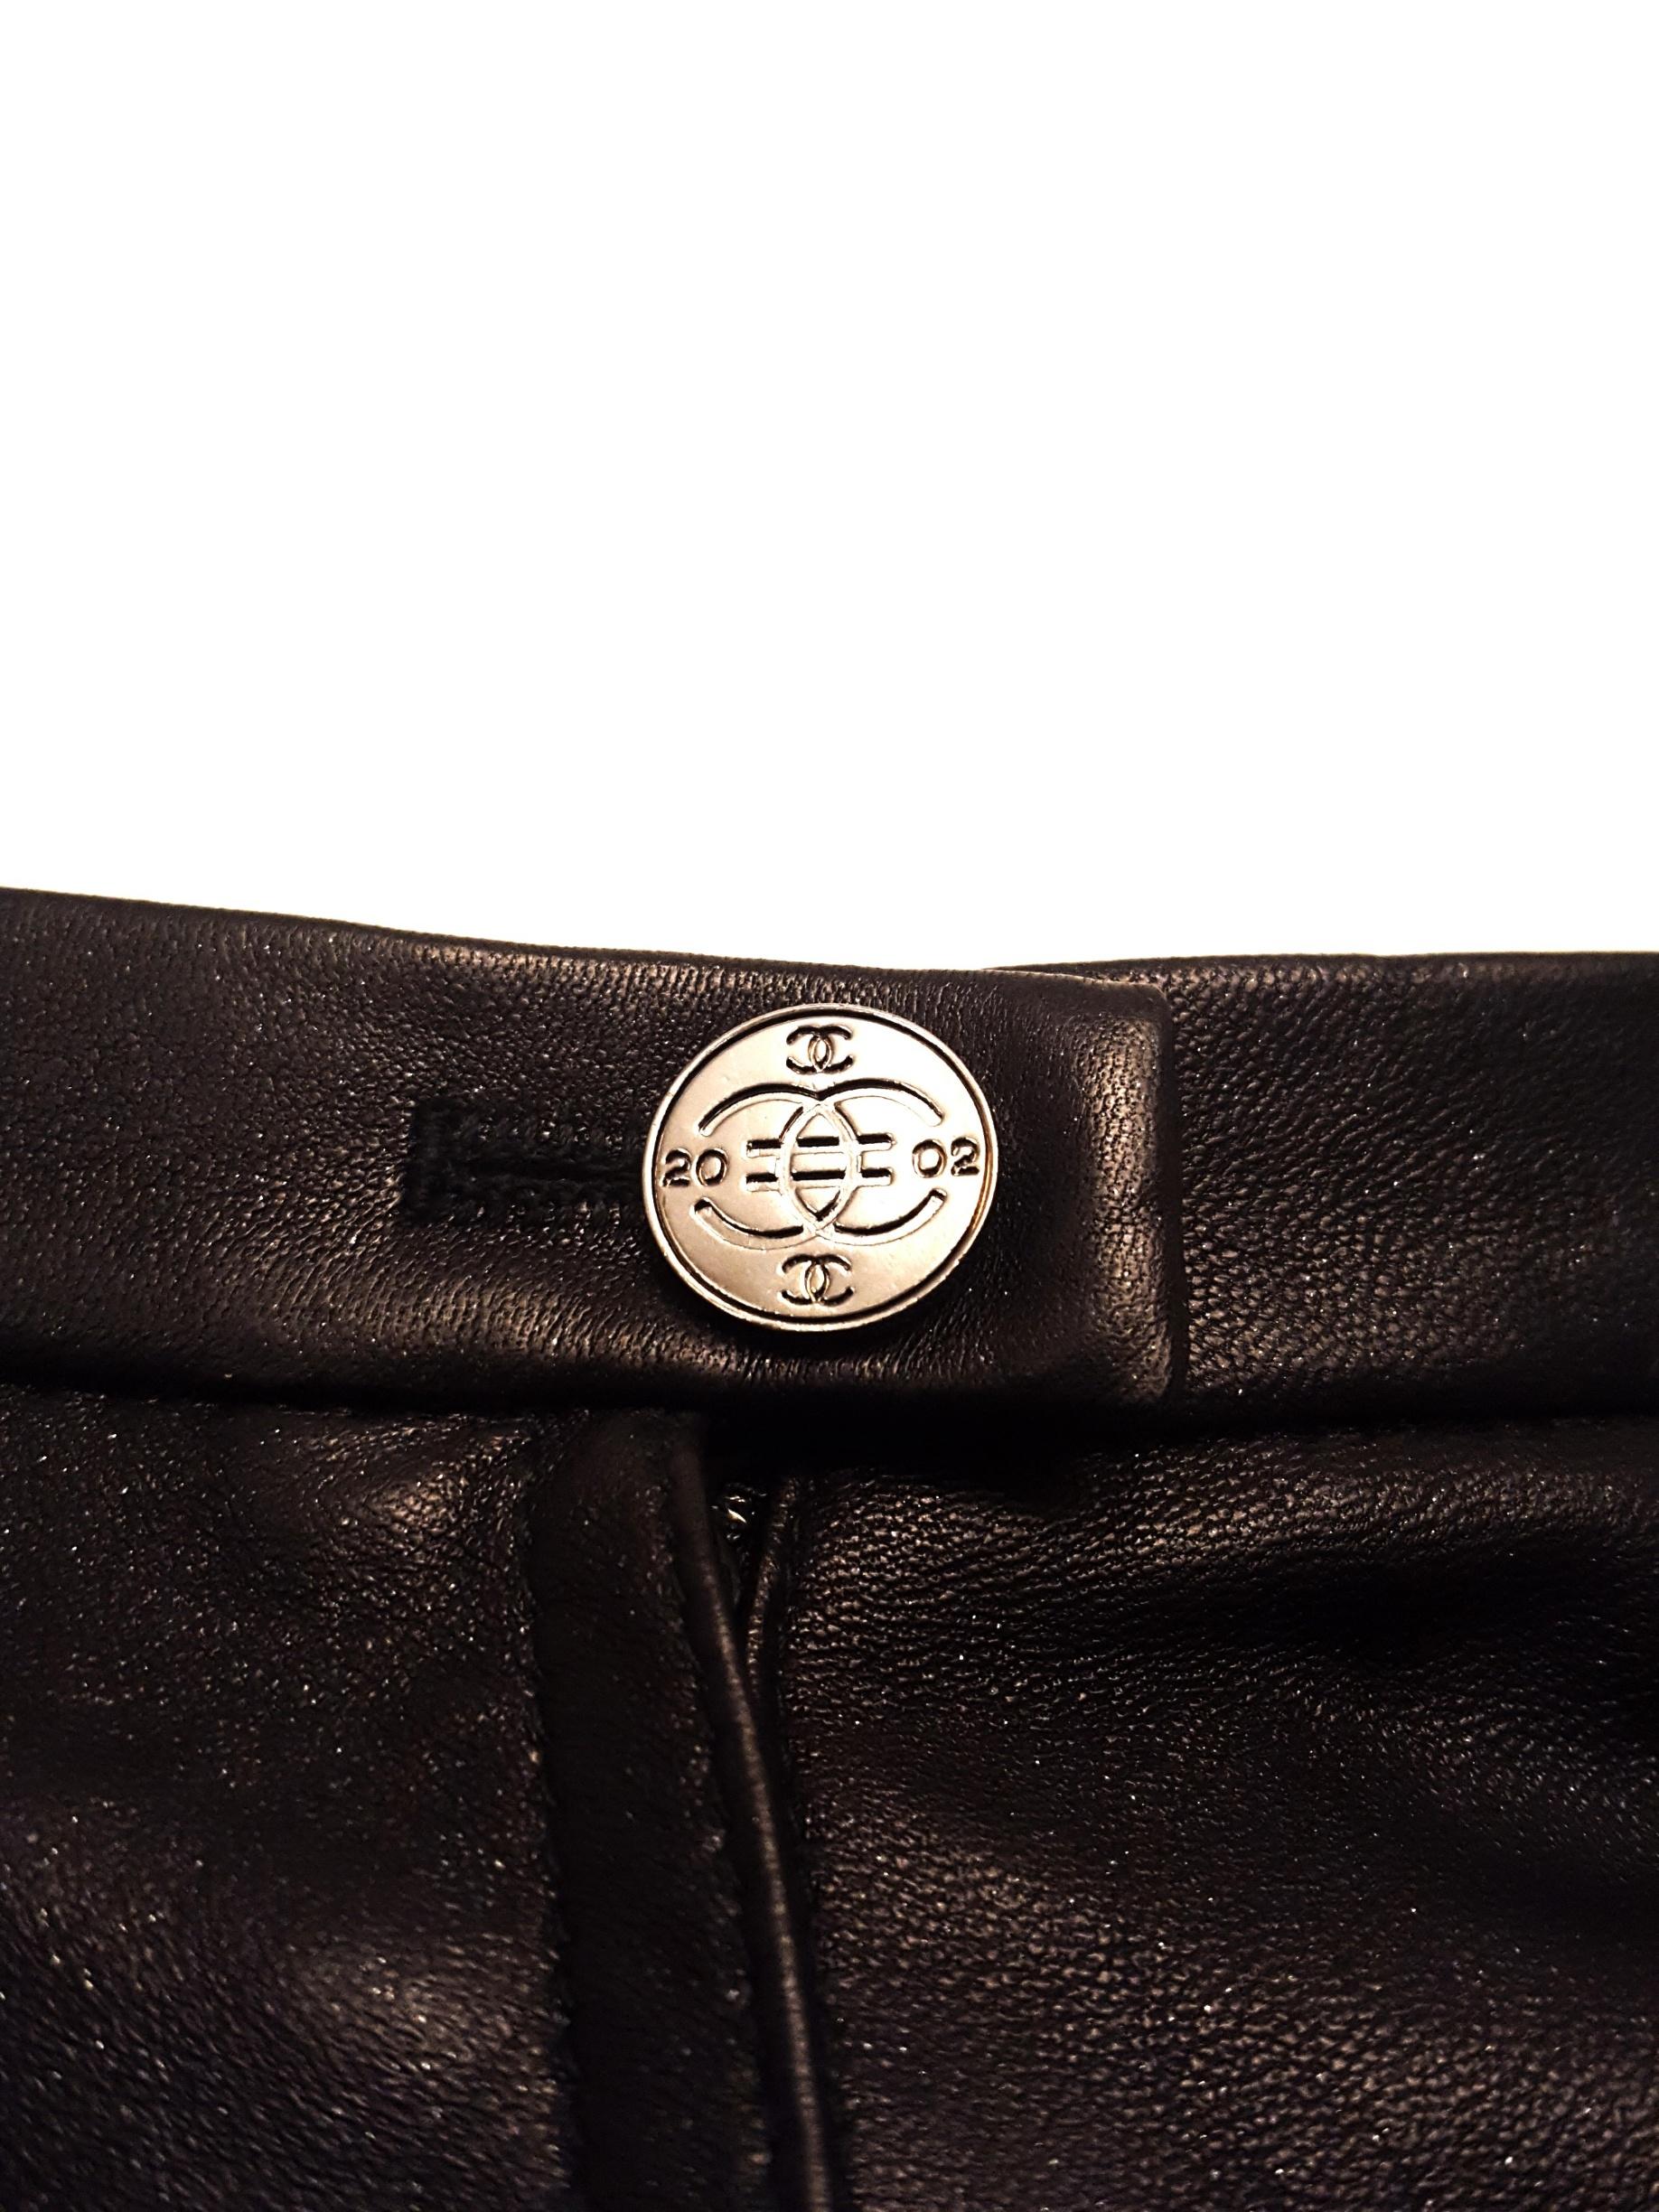 Chanel Black Leather skirt 2002 Fall 40 In Excellent Condition For Sale In Palm Beach, FL